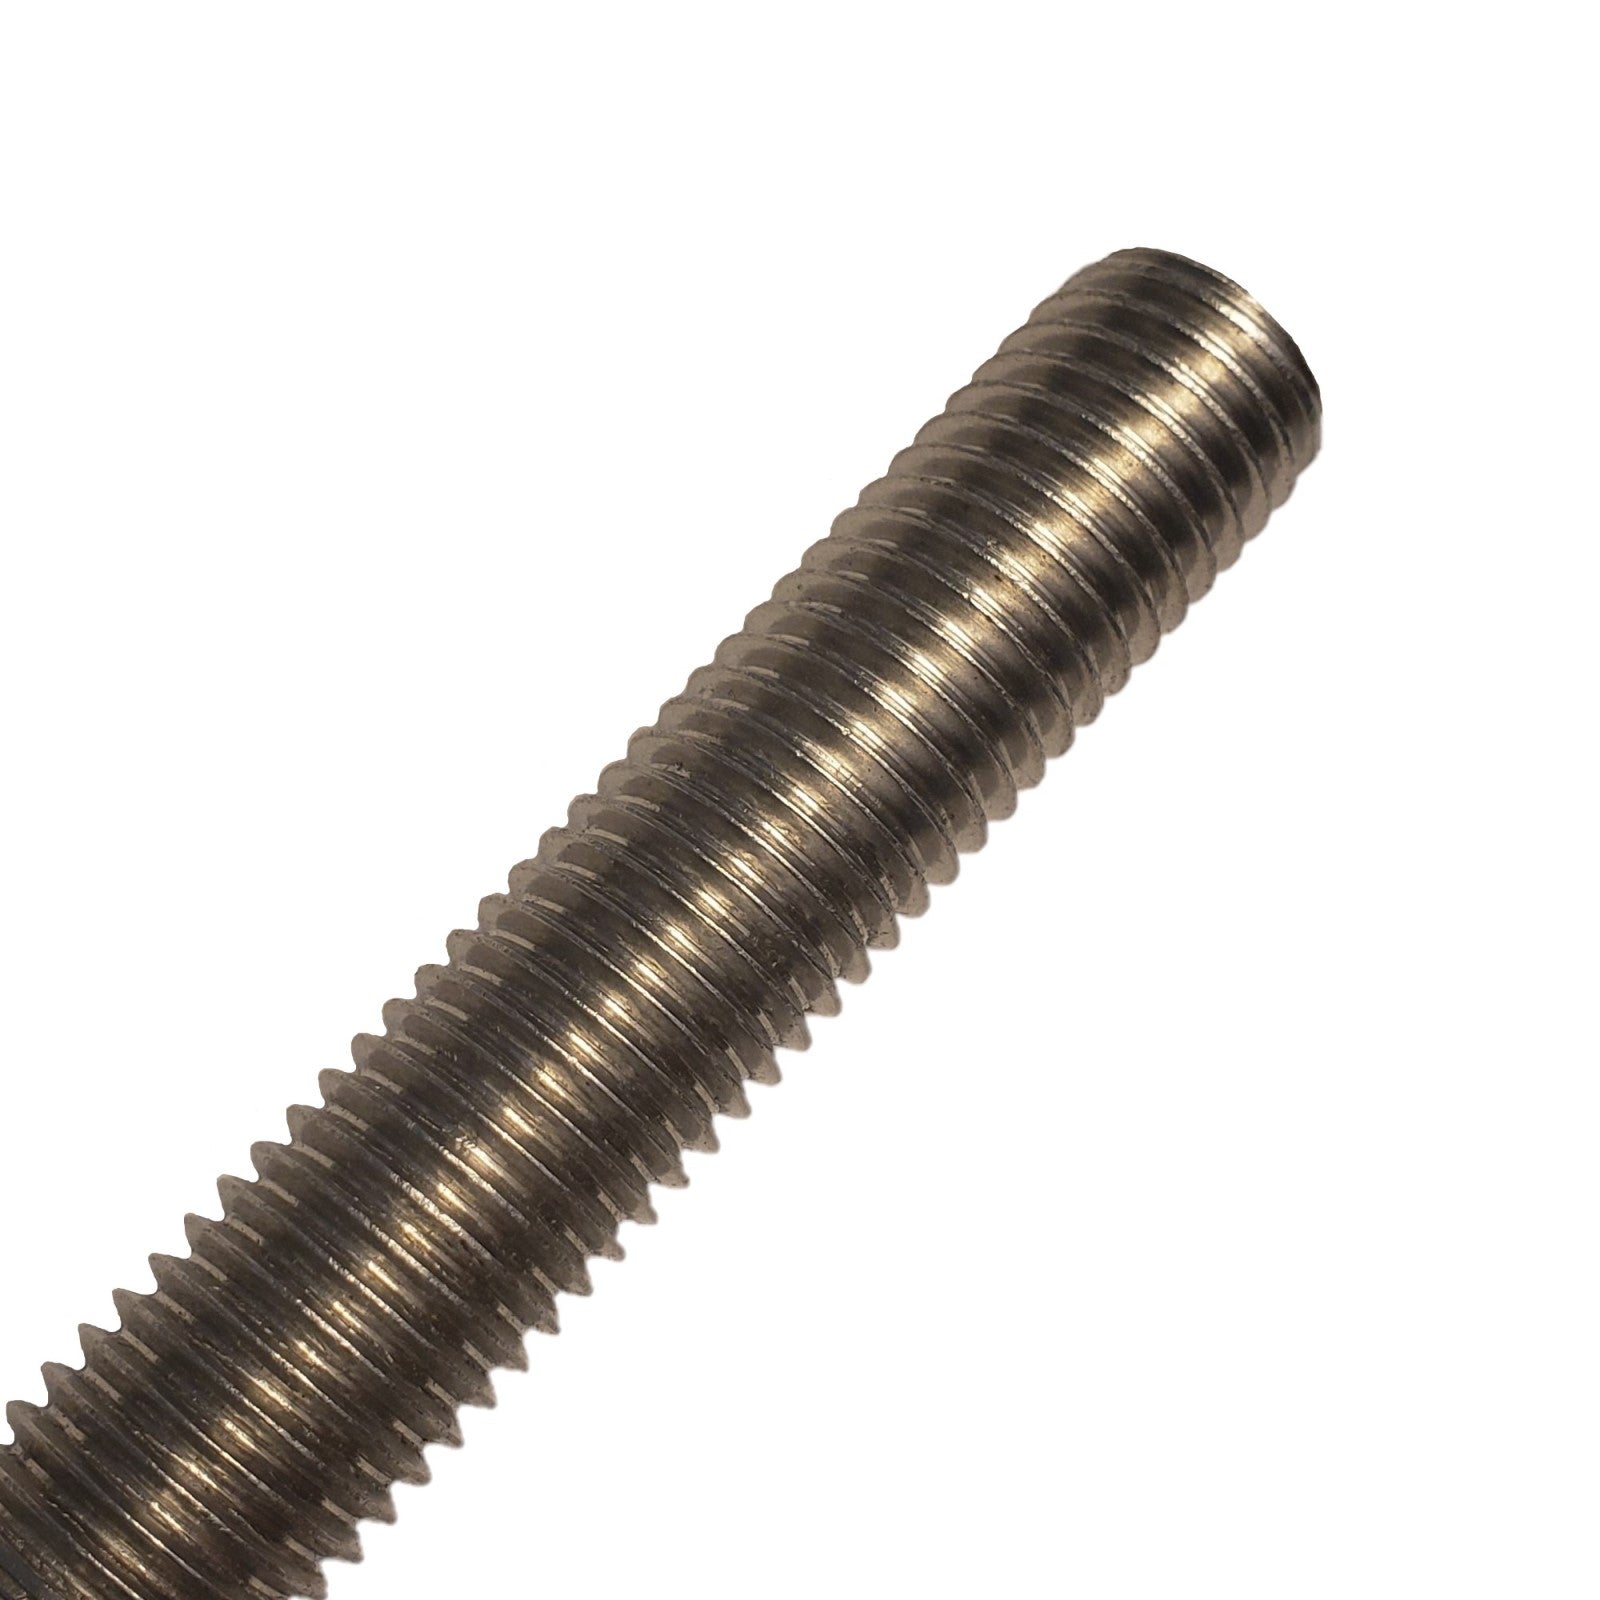 12 inch13 x 36 inch 316 Stainless Steel Threaded Rod